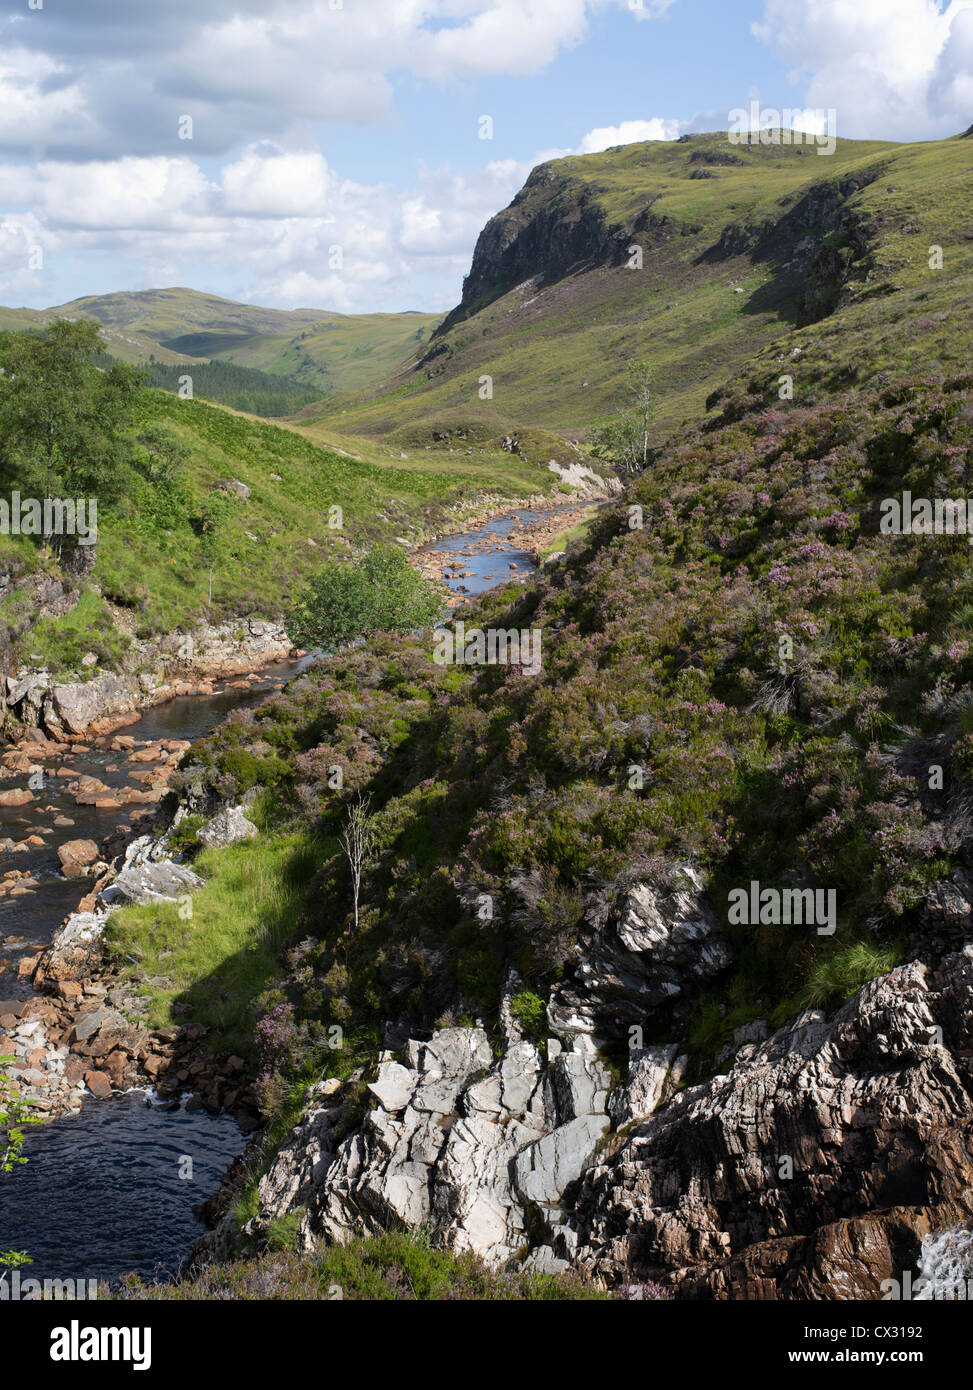 dh glen DUNDONNELL RIVER SUTHERLAND Scottish highland scenic glen and craggy mountain heather countryside Stock Photo